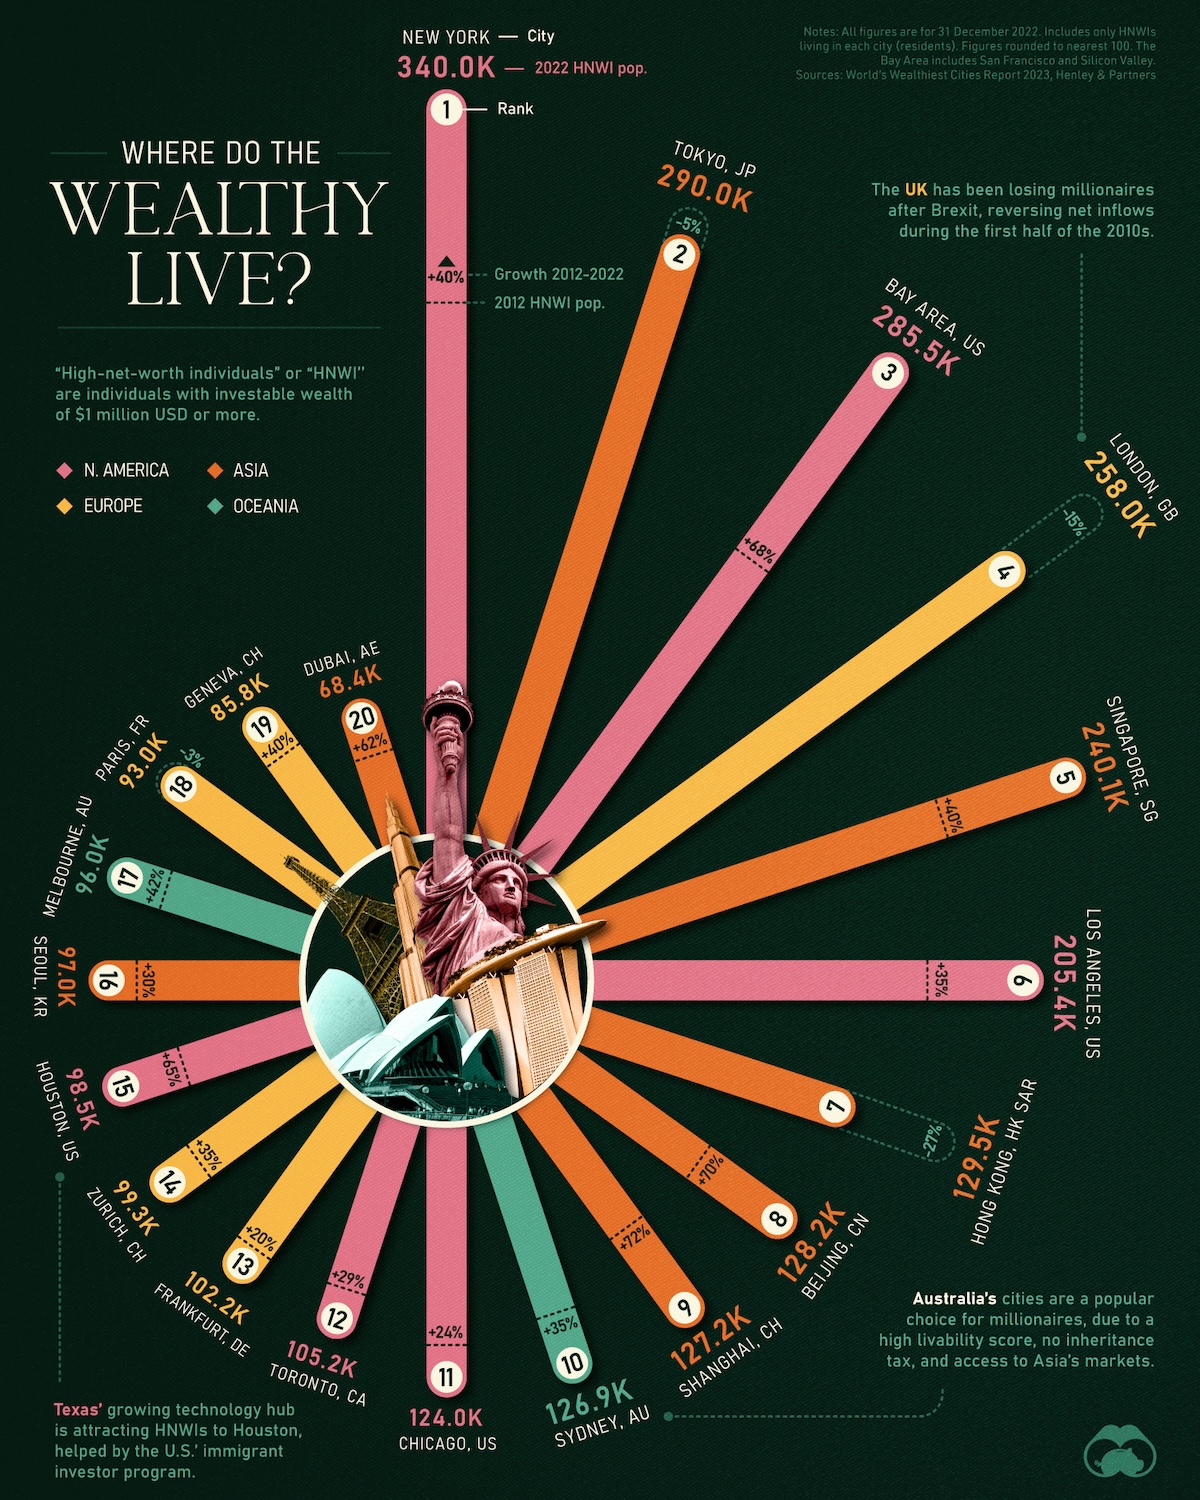 Who Were the Richest People in the World at the End of 2022?